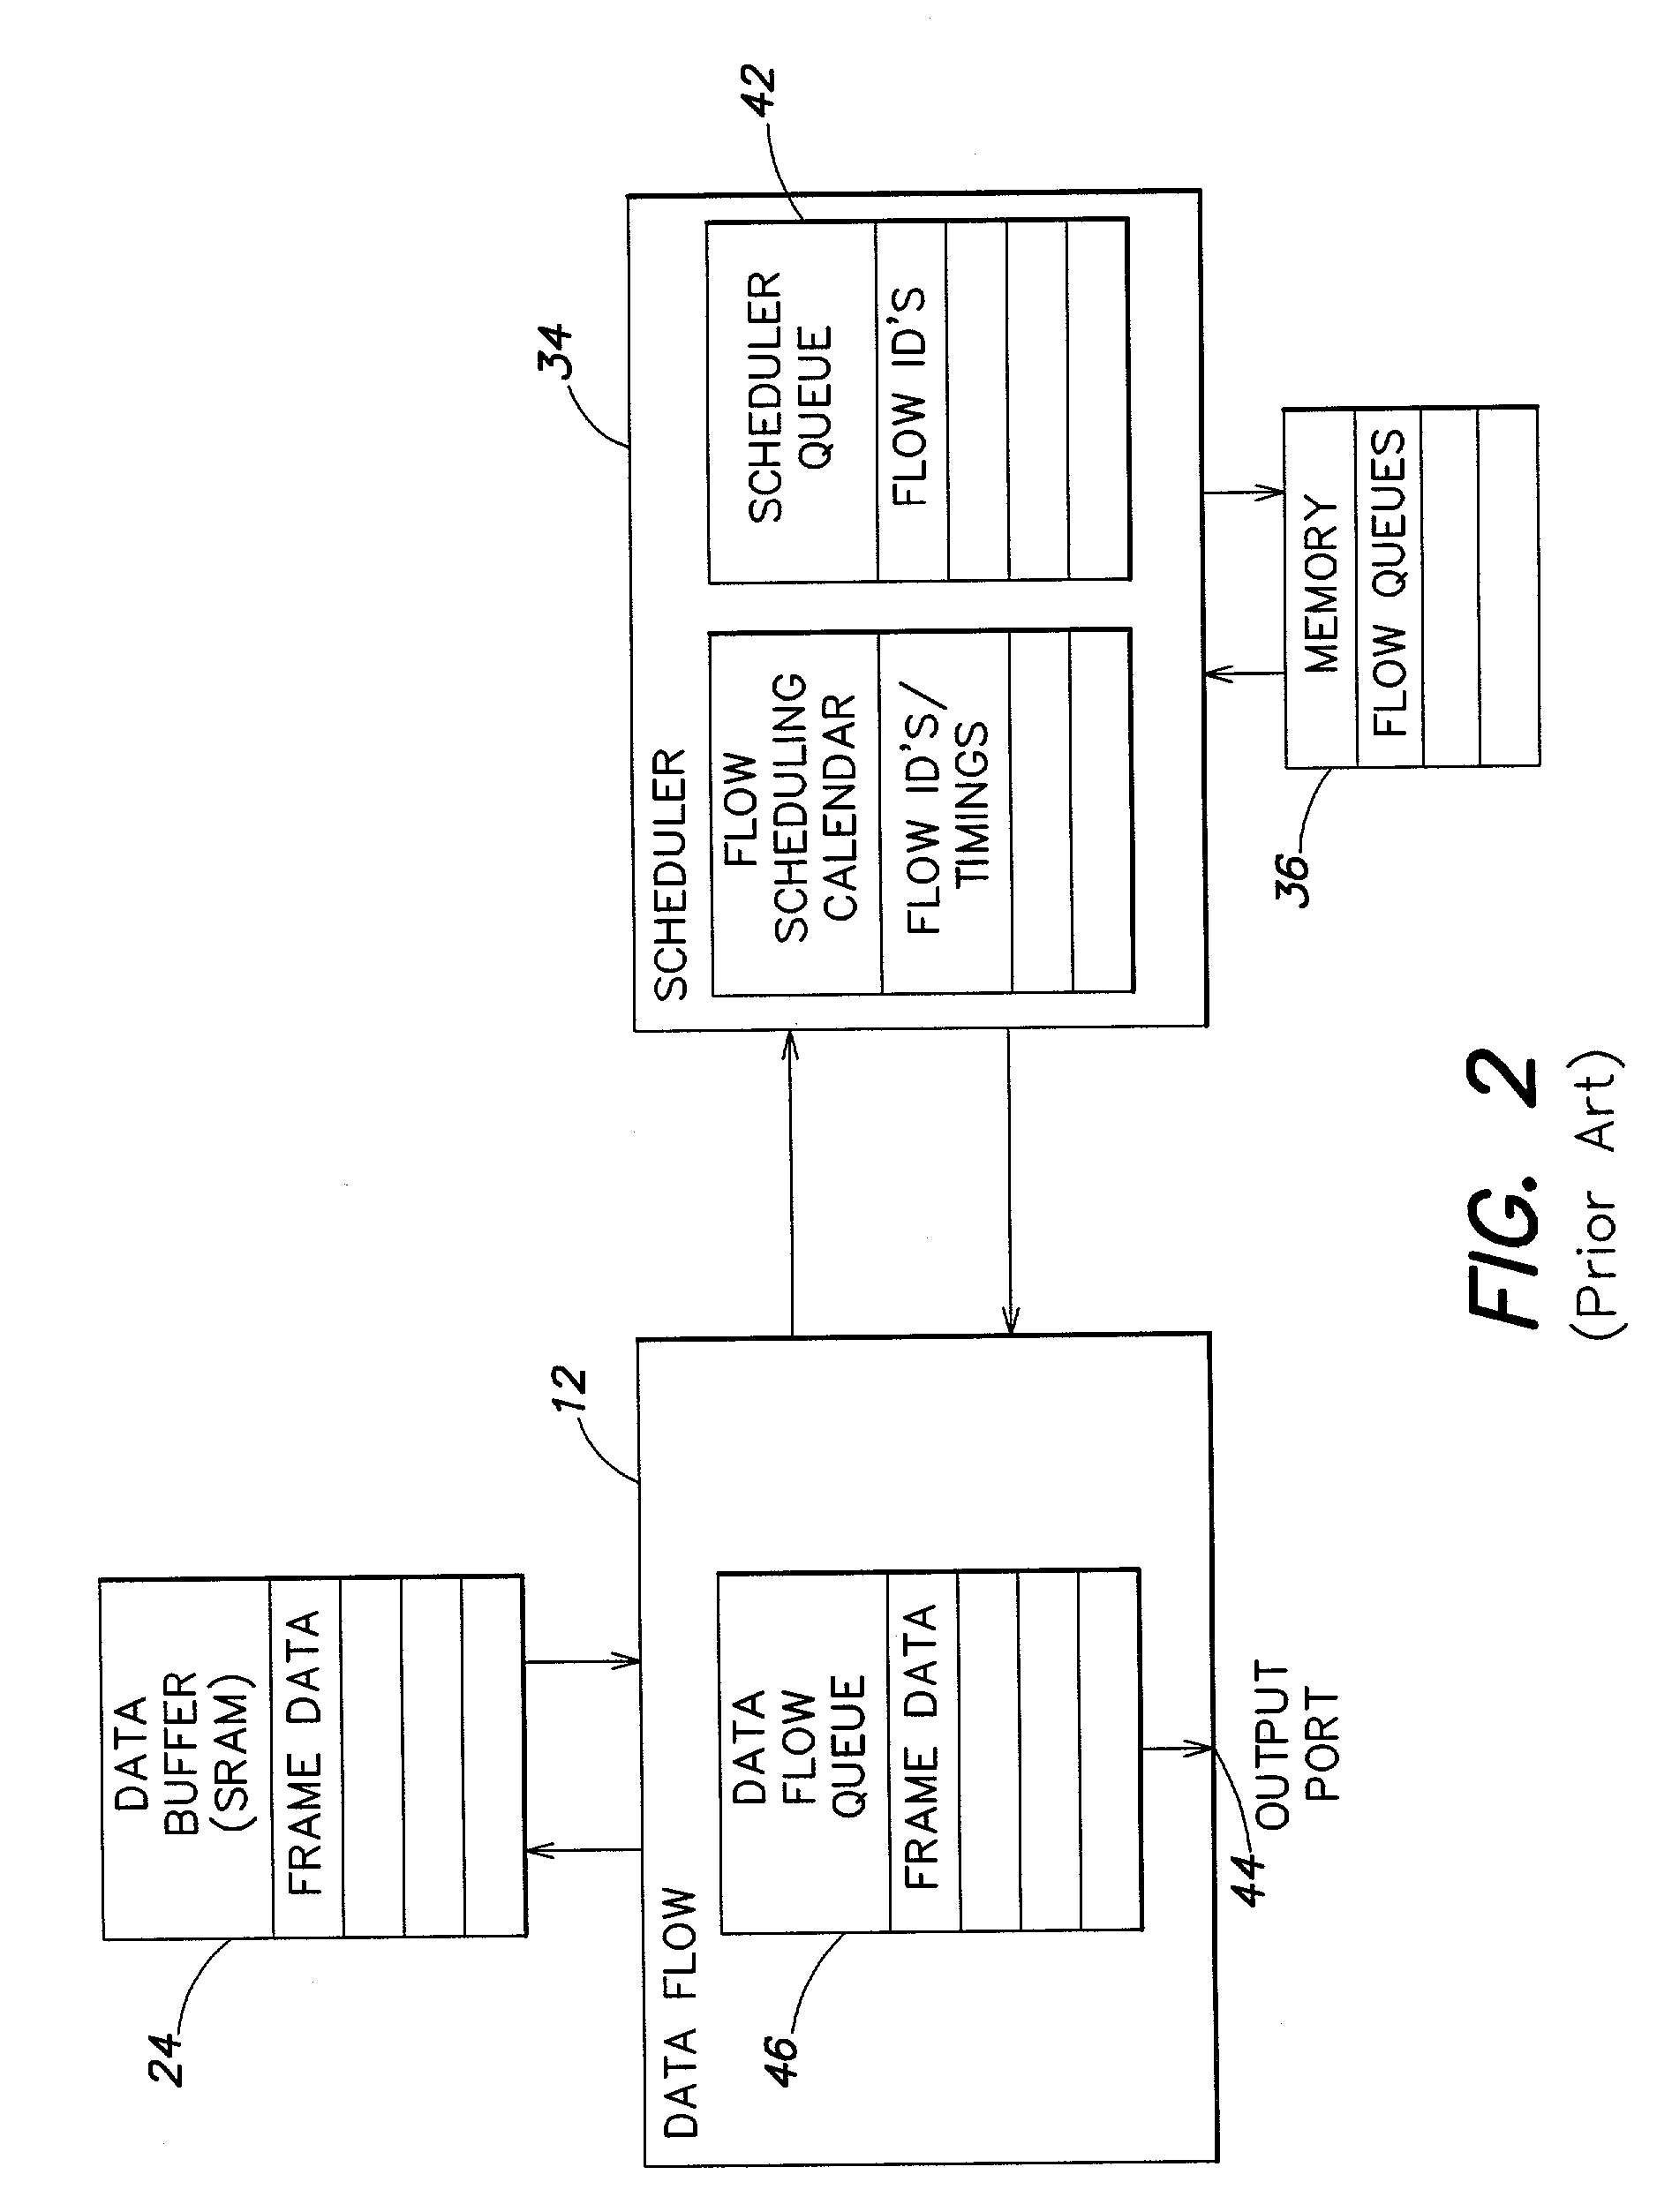 Method and apparatus for improving the fairness of new attaches to a weighted fair queue in a quality of service (QoS) scheduler